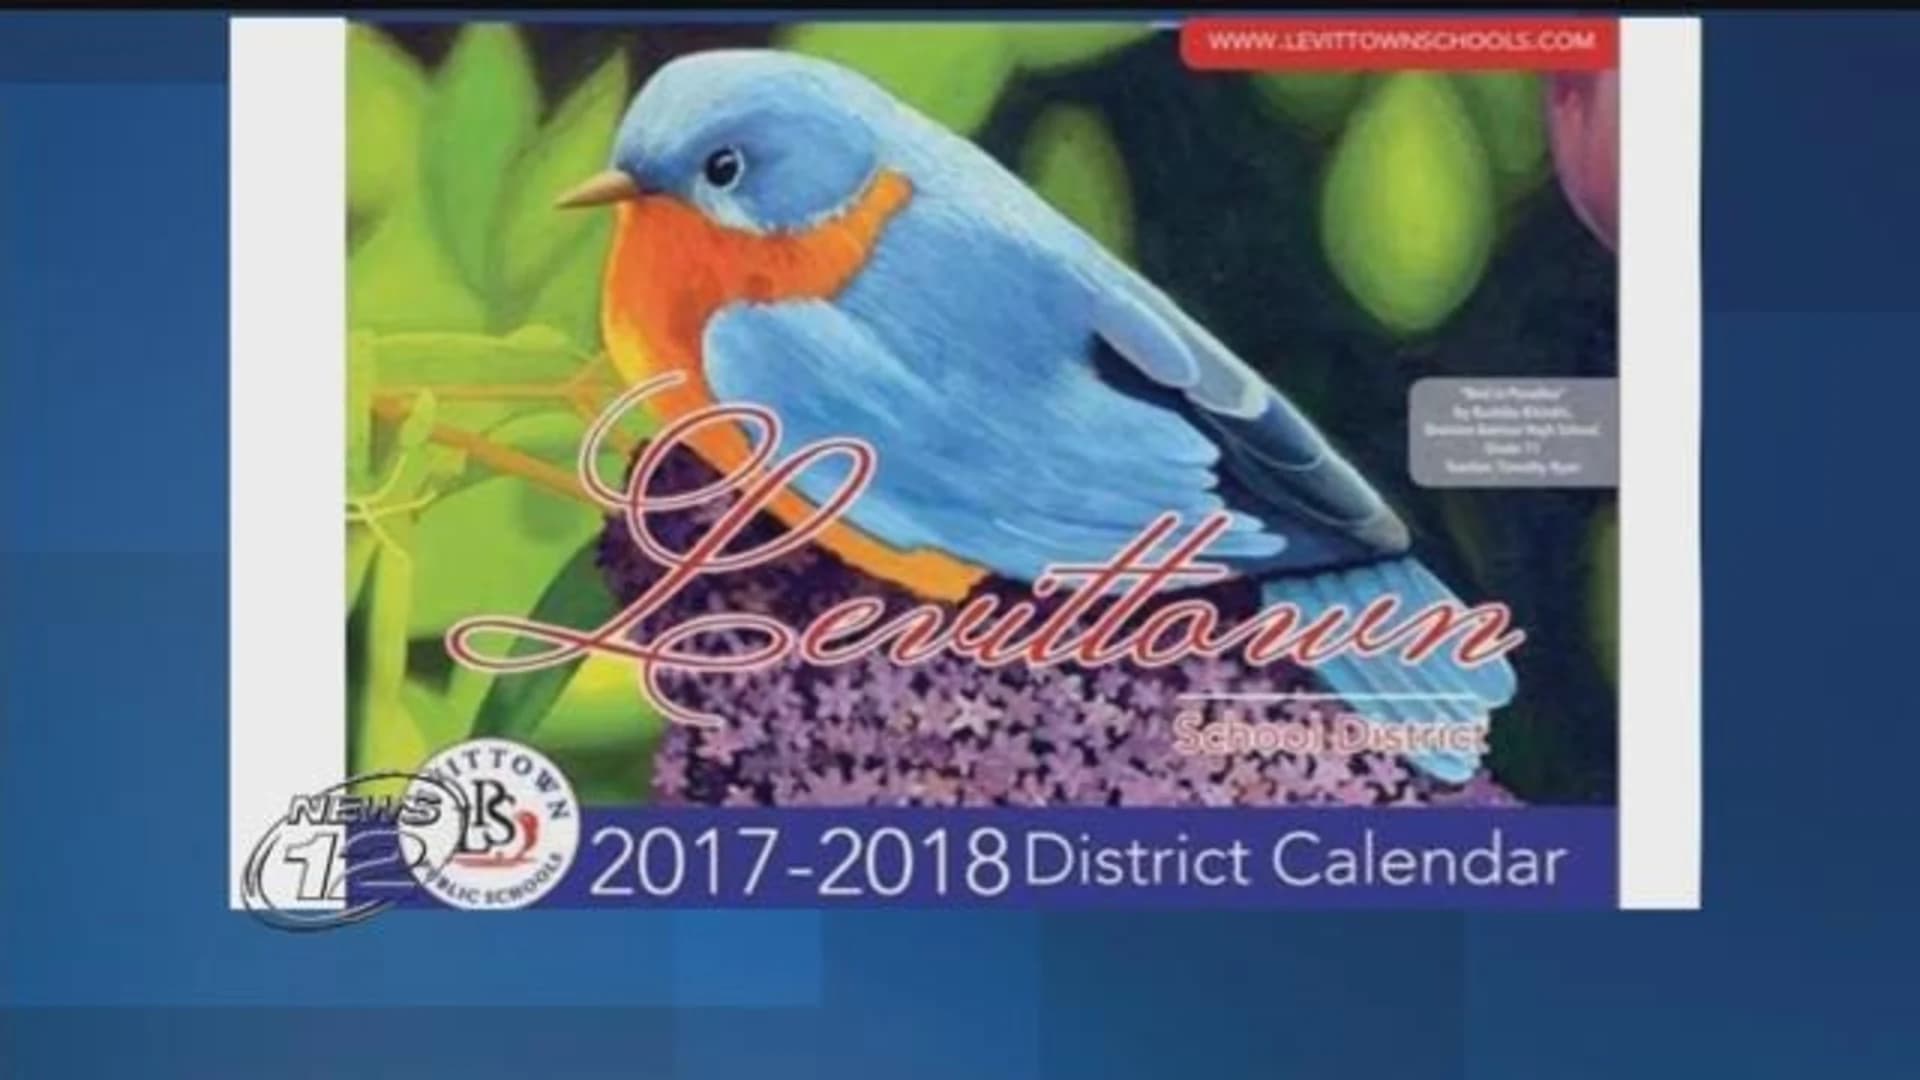 Levittown schools calendar omits holiday names for 'no school'